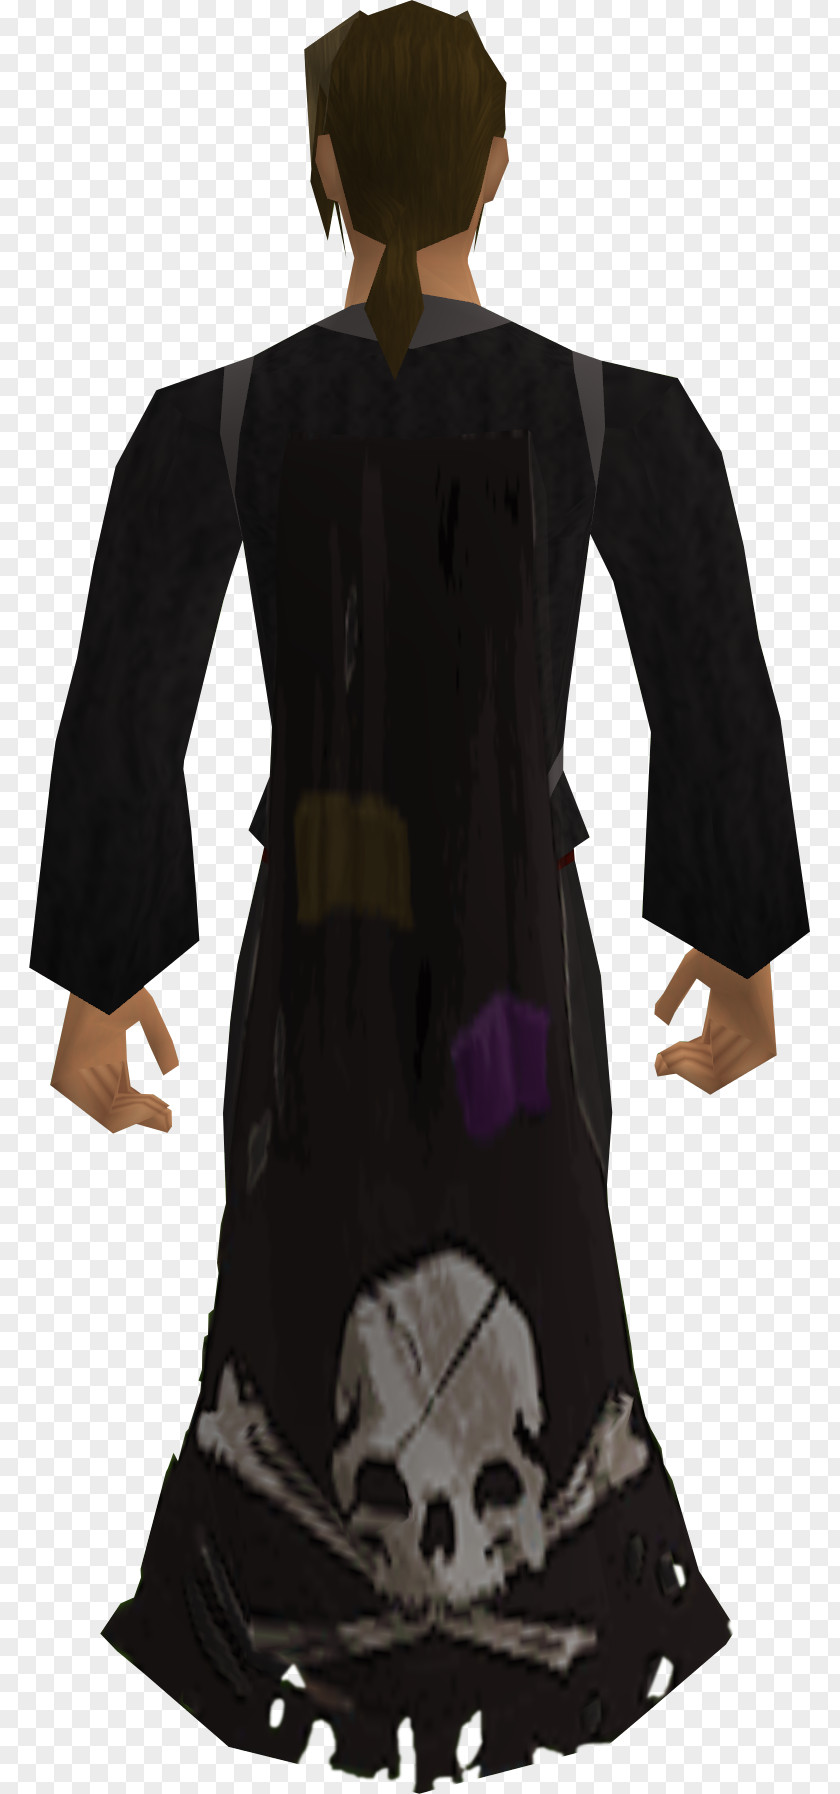 Jolly Roger Etsy RuneScape Robe Wikia PNG